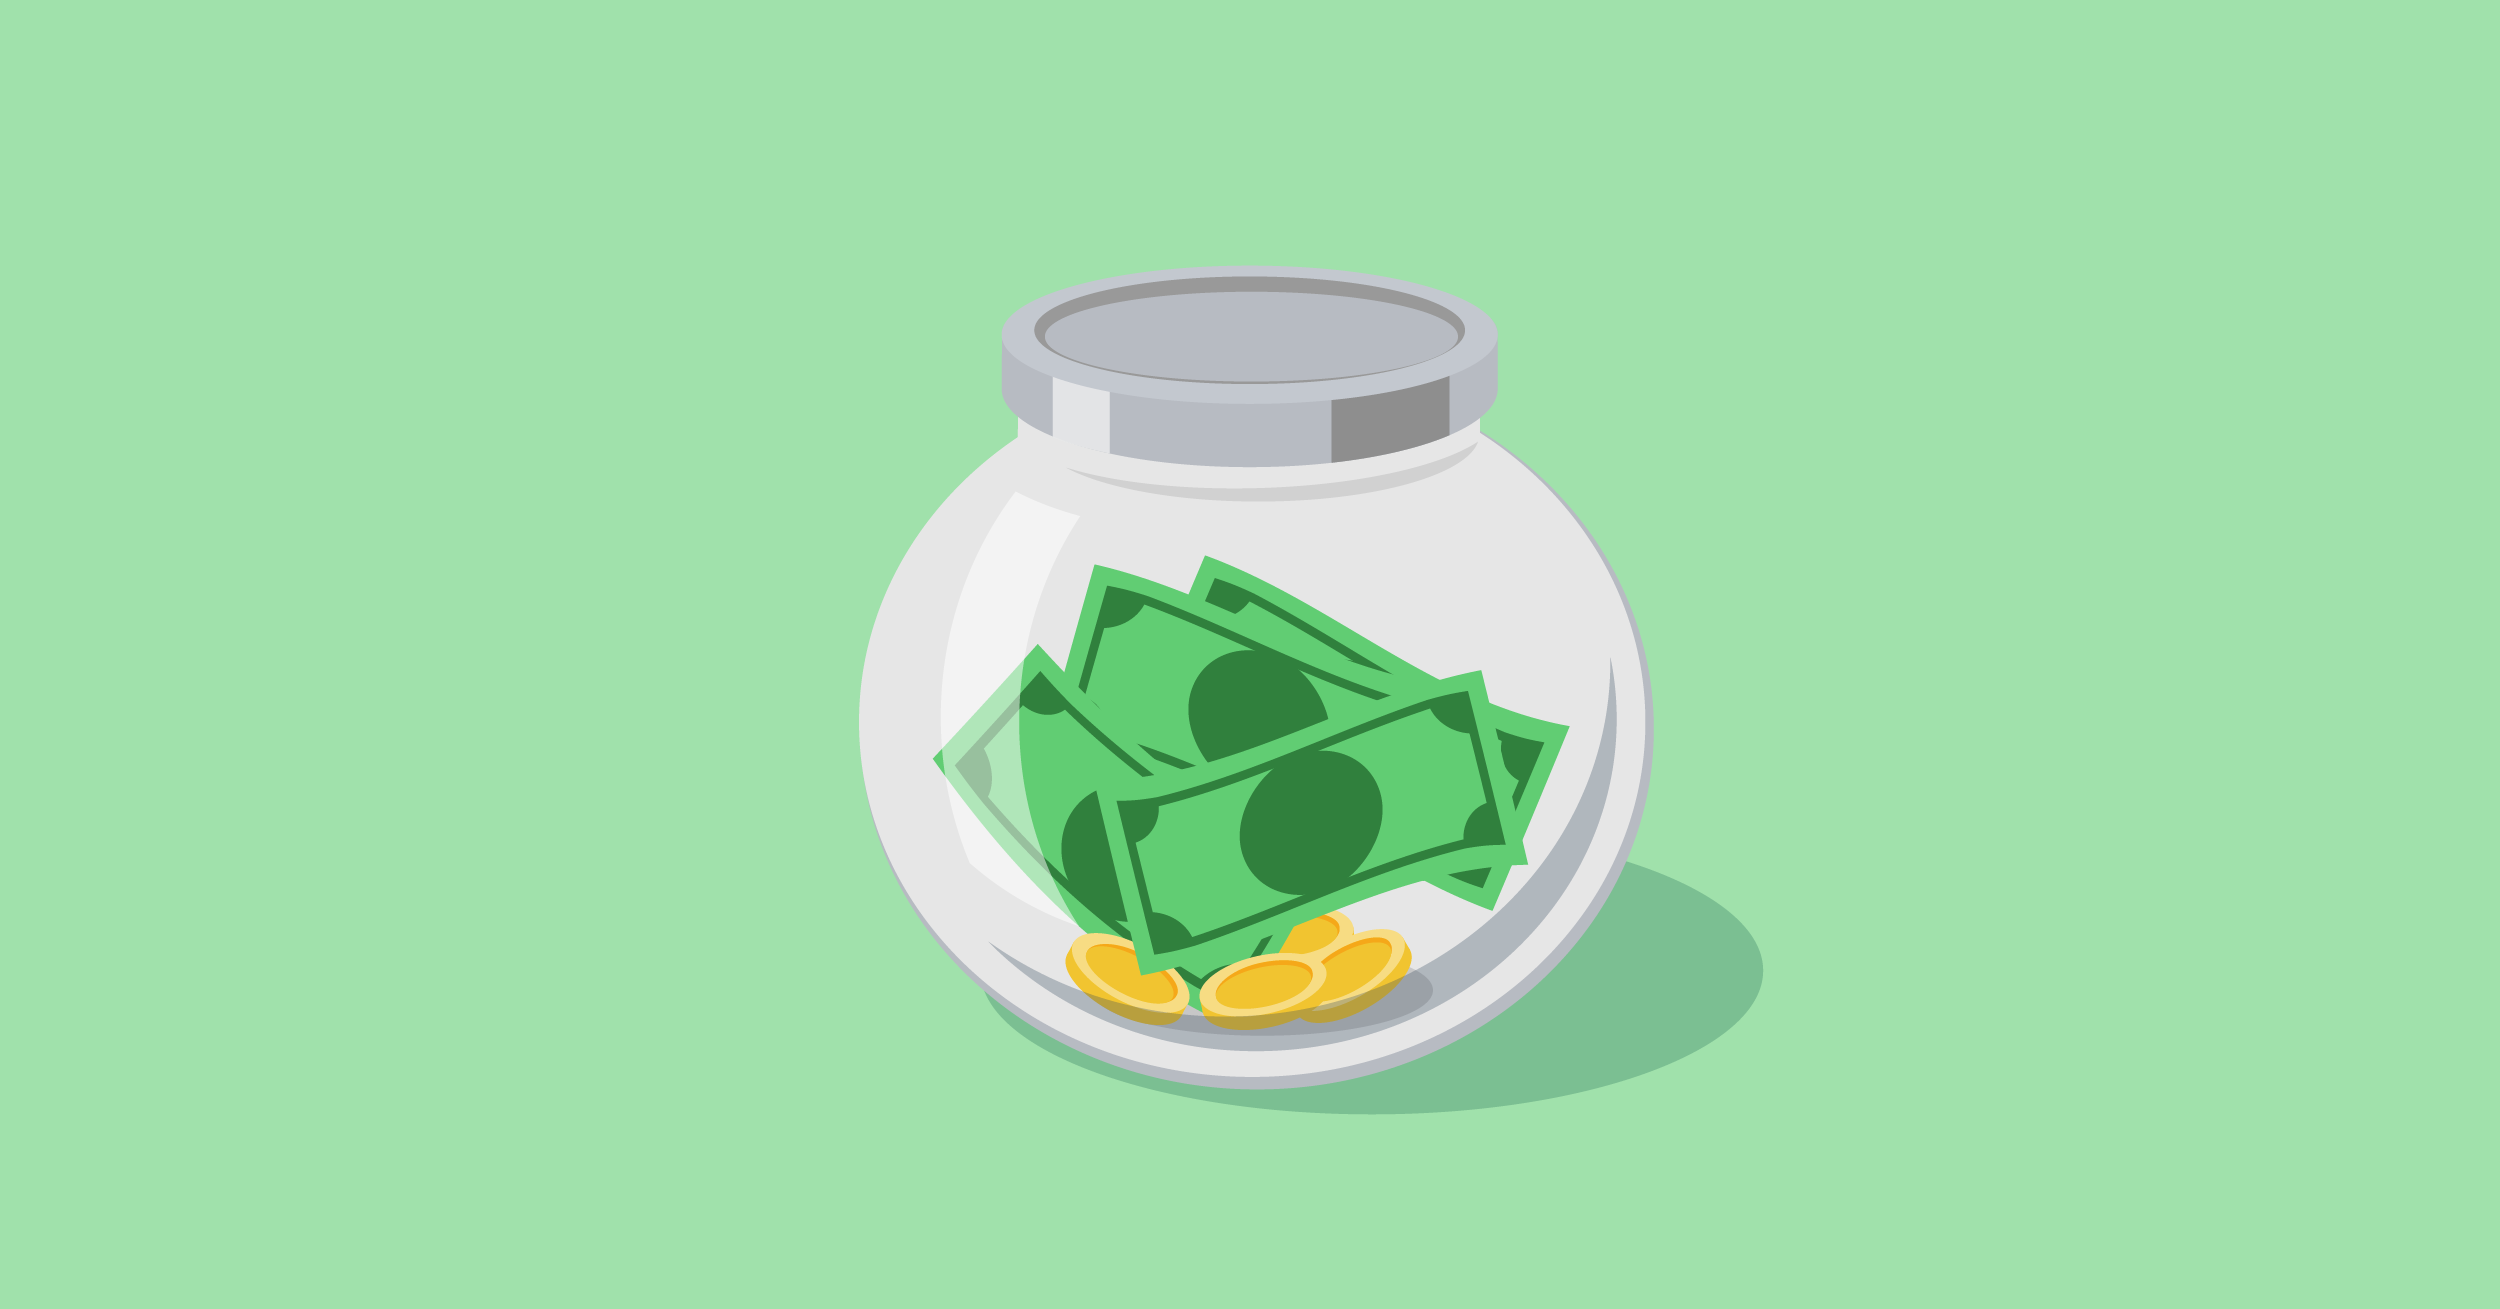 Illustration showing a jar filled with money